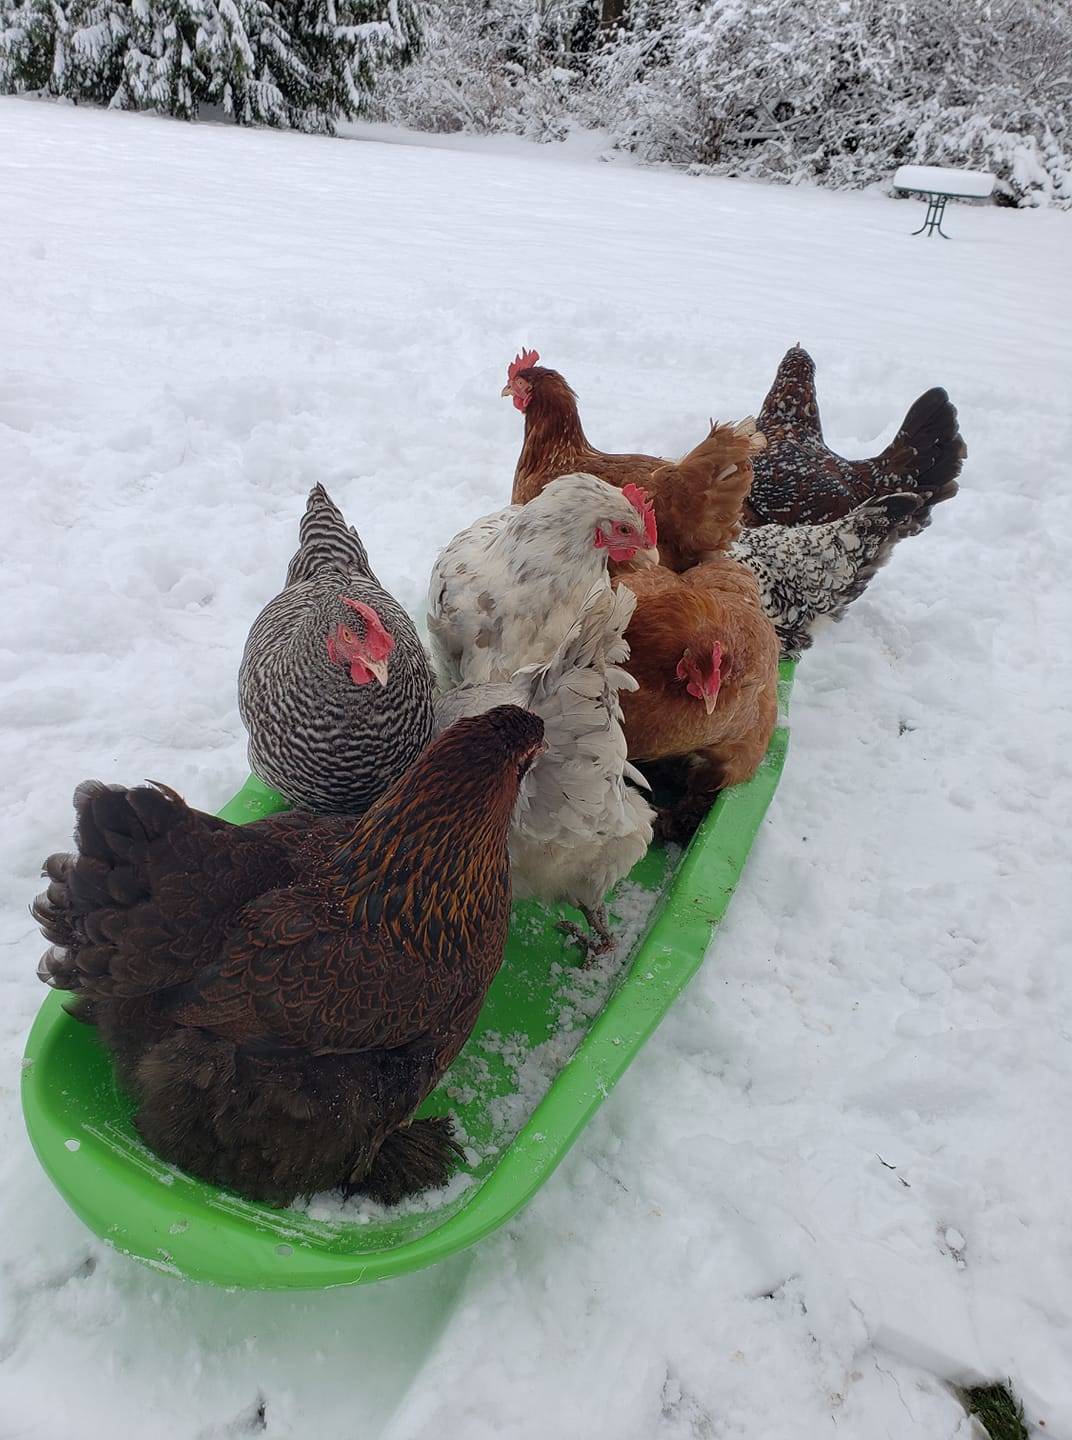 Some local chickens enjoying the snow. Photo courtesy of Kim Dunlap